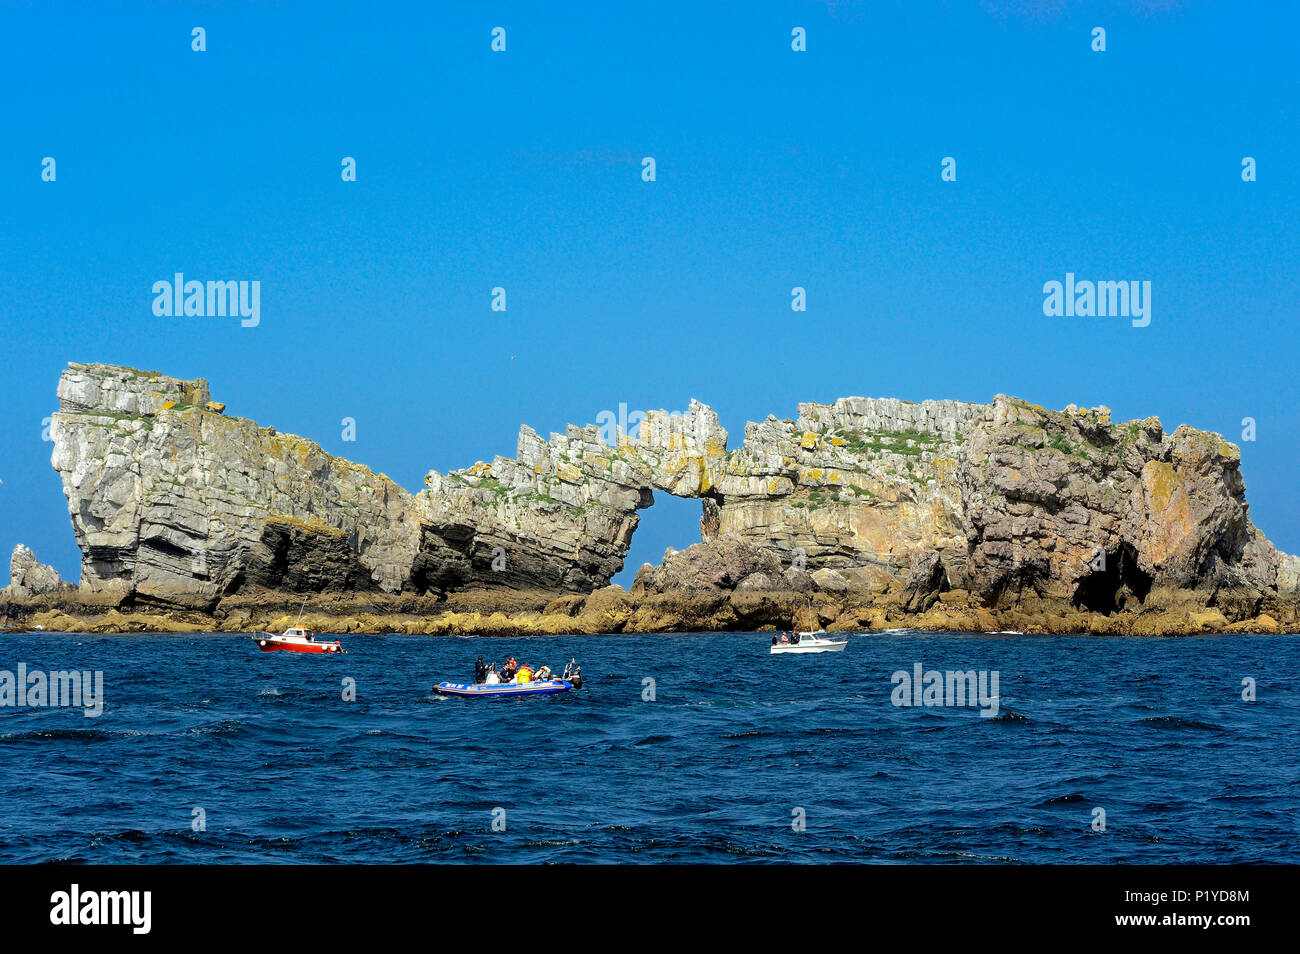 France, Brittany, Finistere, the Touliguet Rock in the Iroise Sea, near the Crozon Peninsula Stock Photo